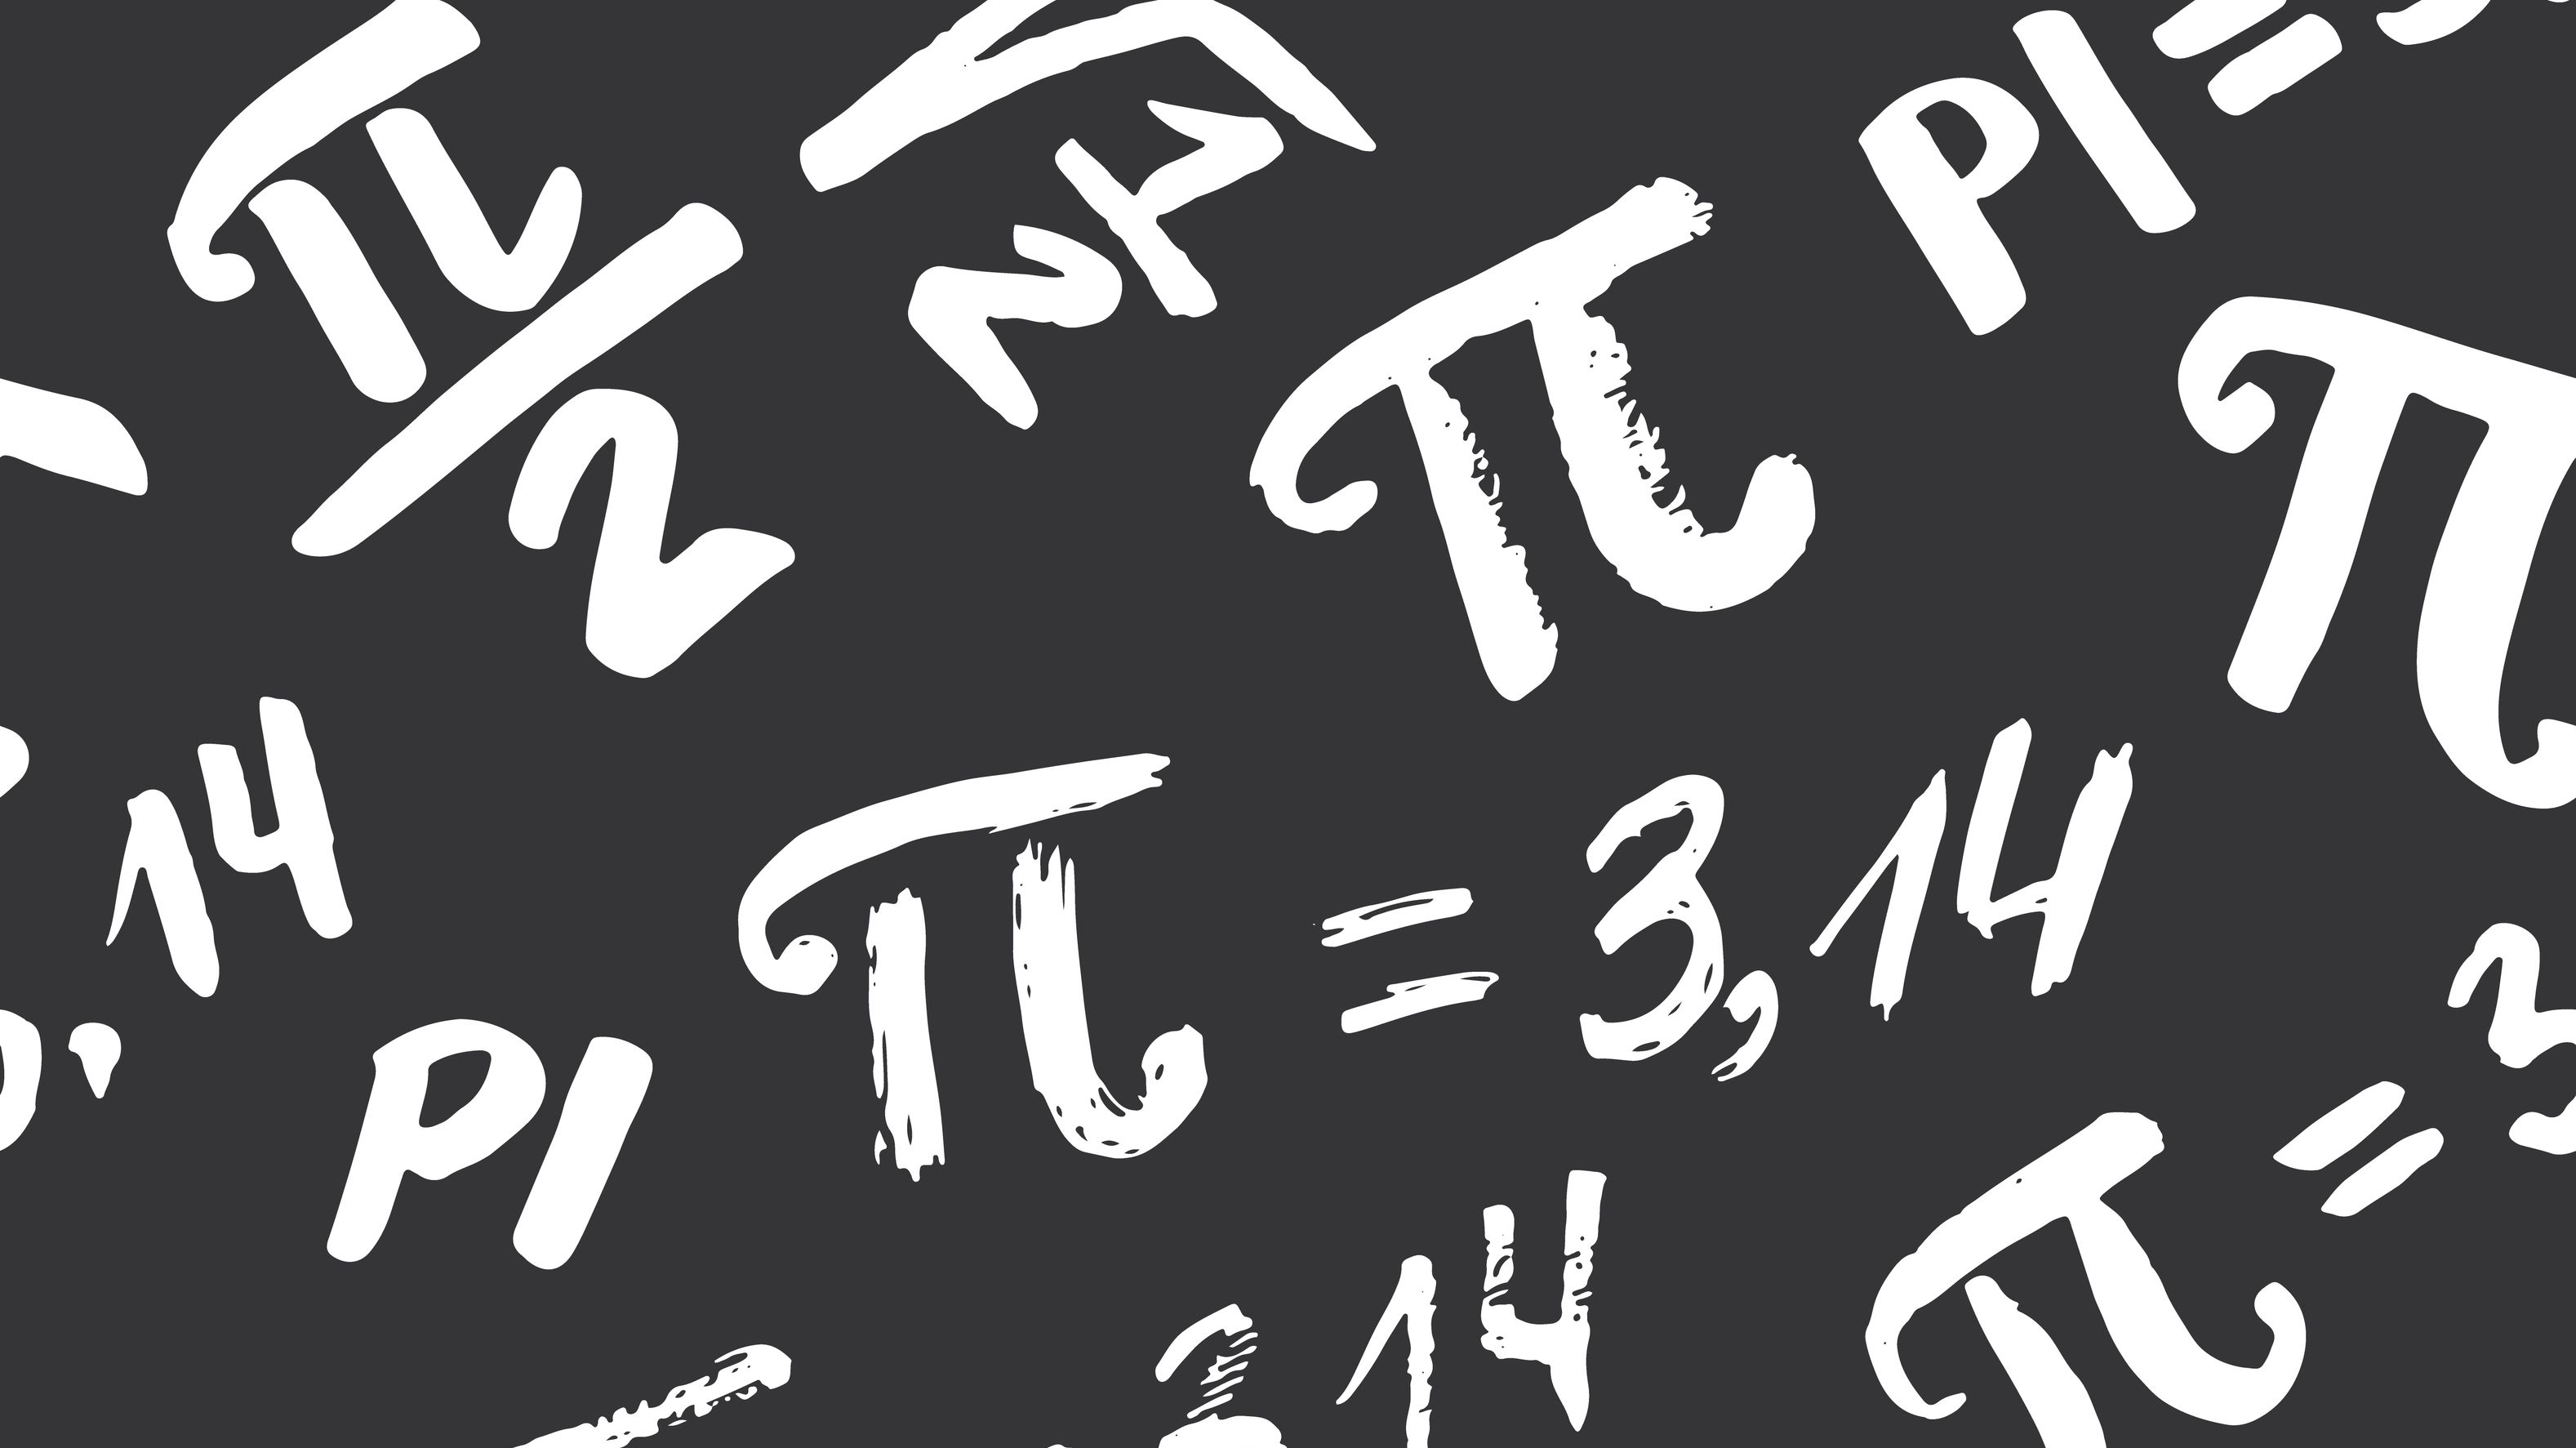 15-pi-day-math-problems-to-solve-mental-floss